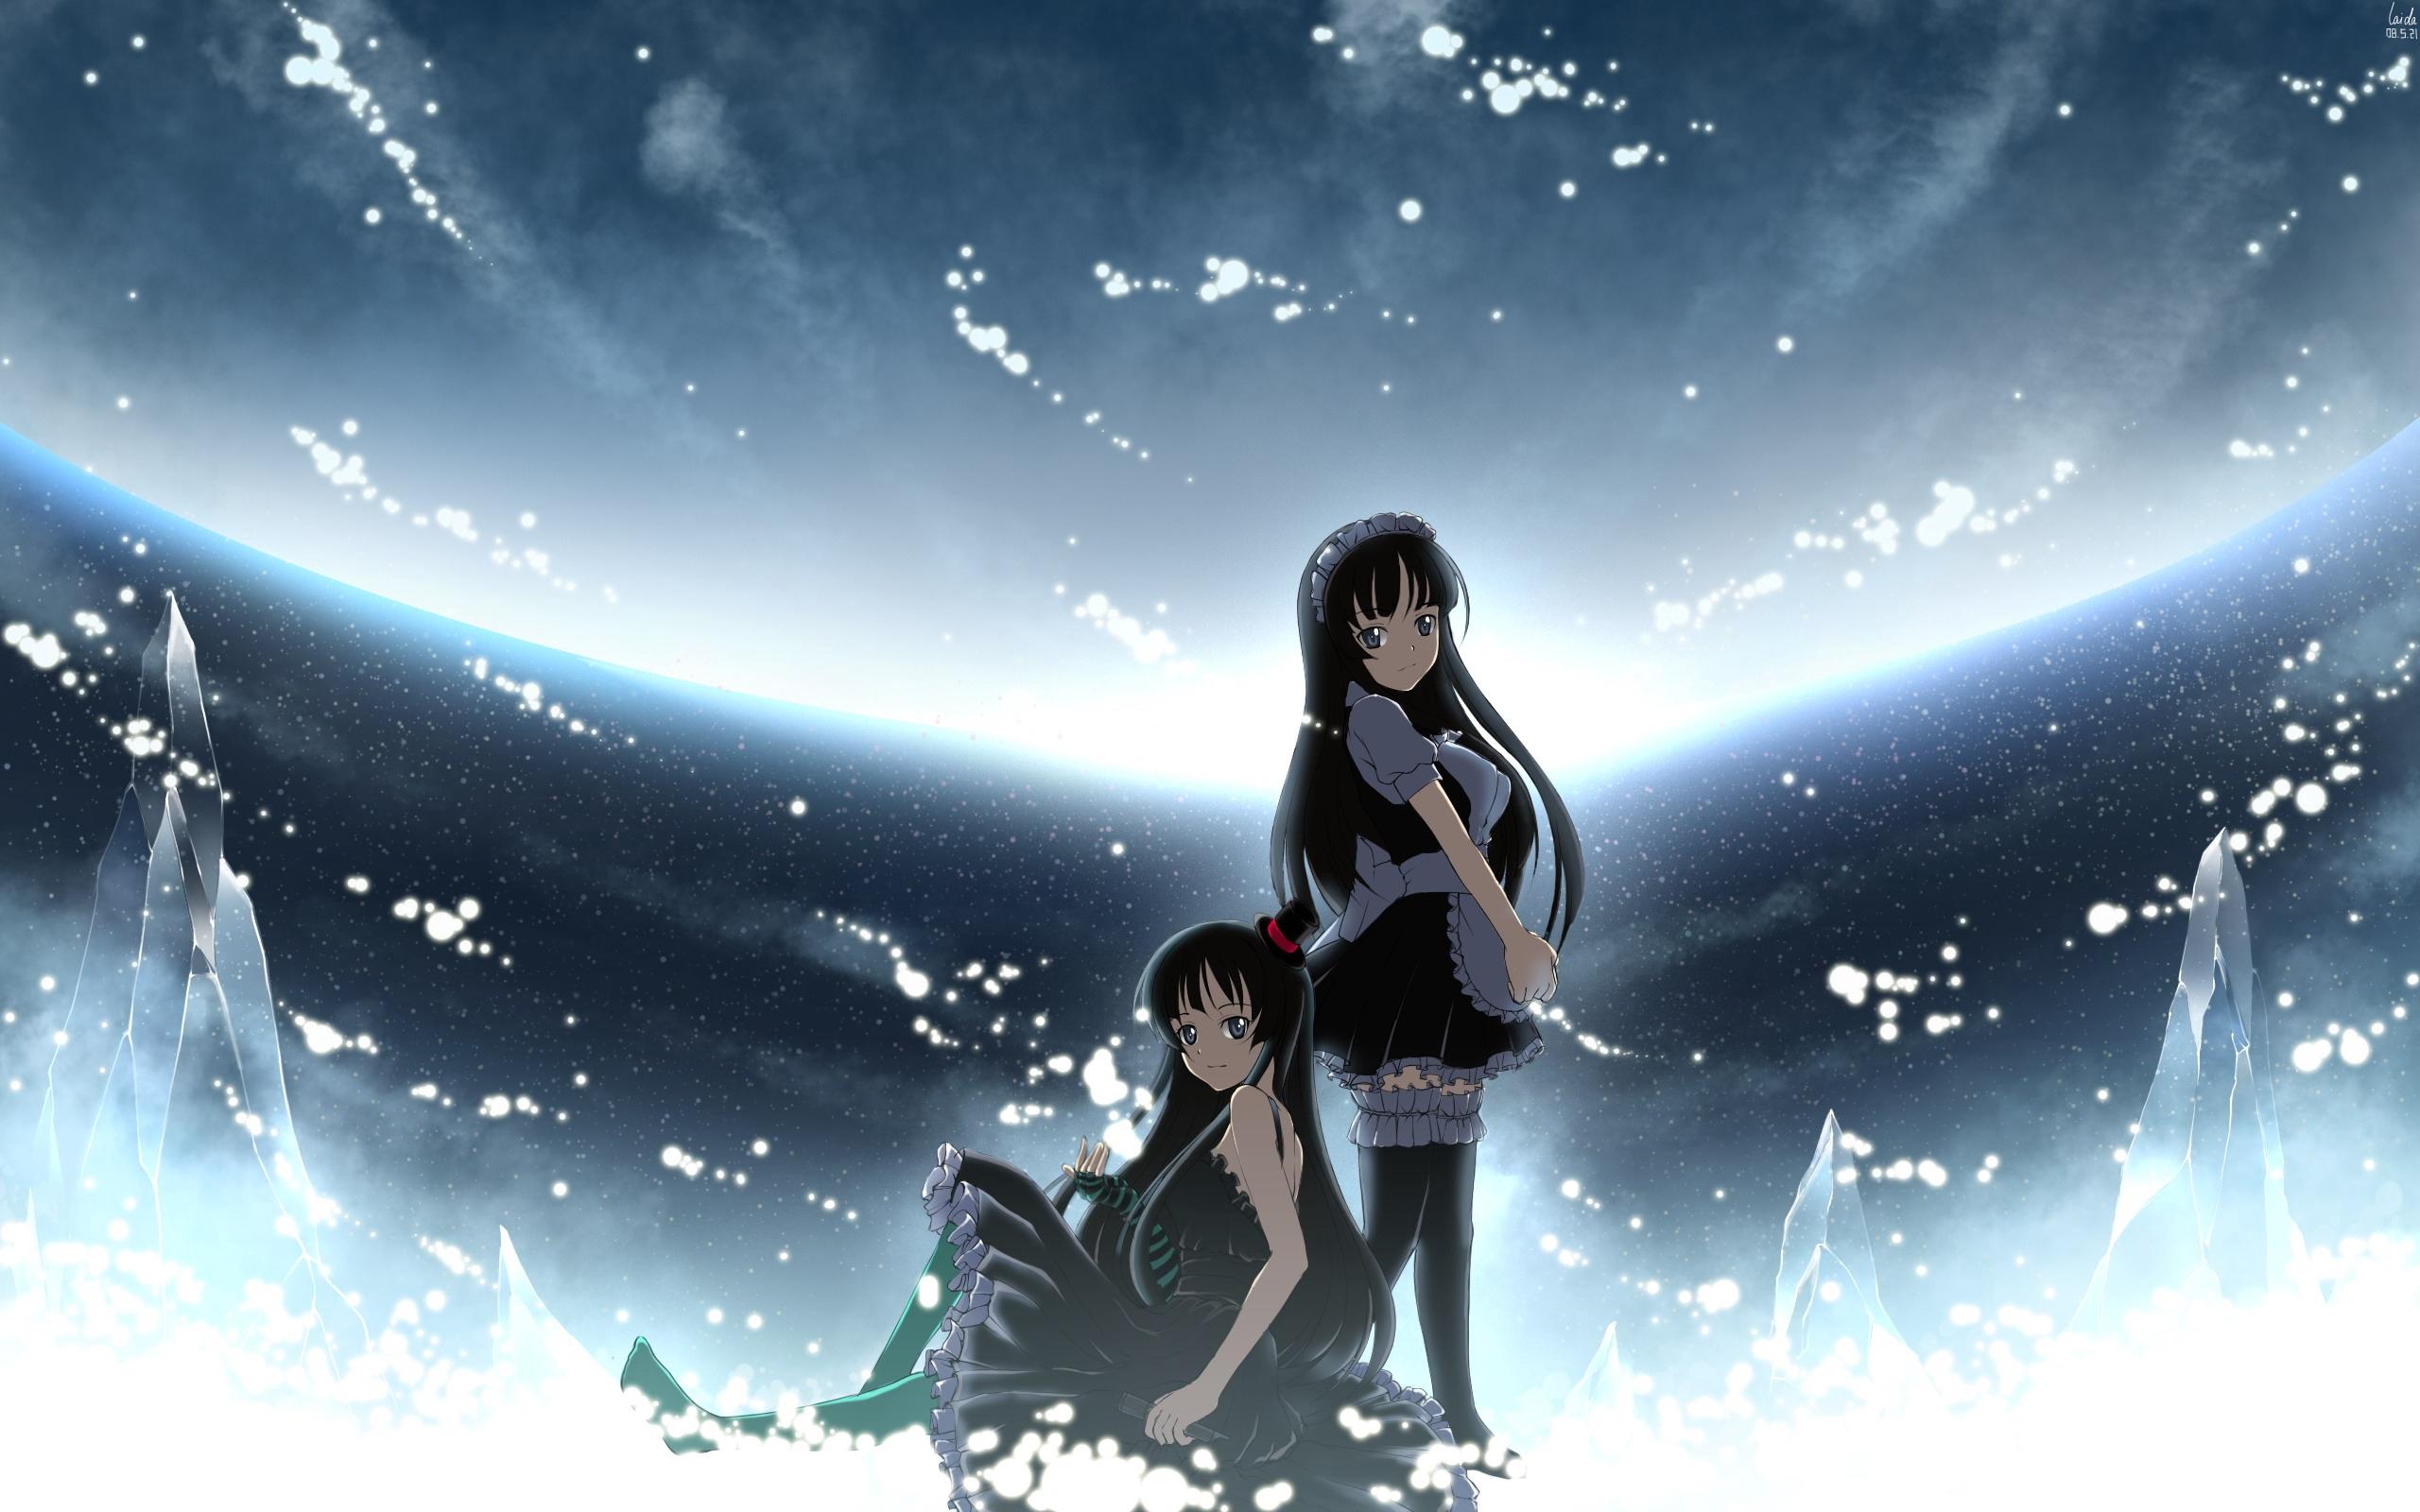 Download wallpaper 2560x1600 anime, brunette, ice, snow, space HD